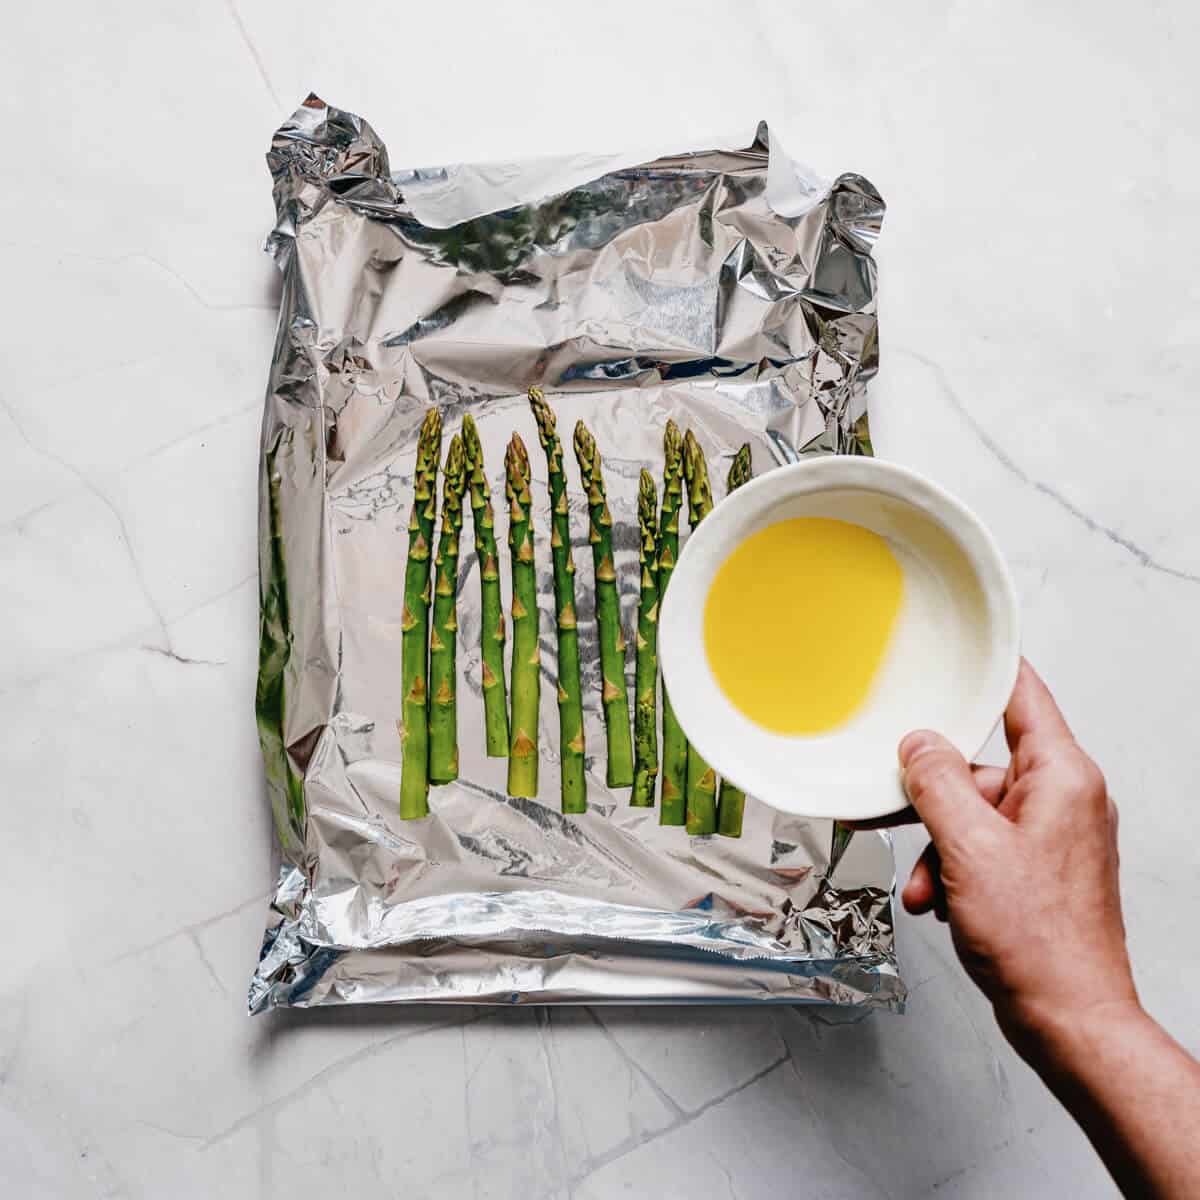 drizzling olive oil over asparagus spears in aluminum foil.